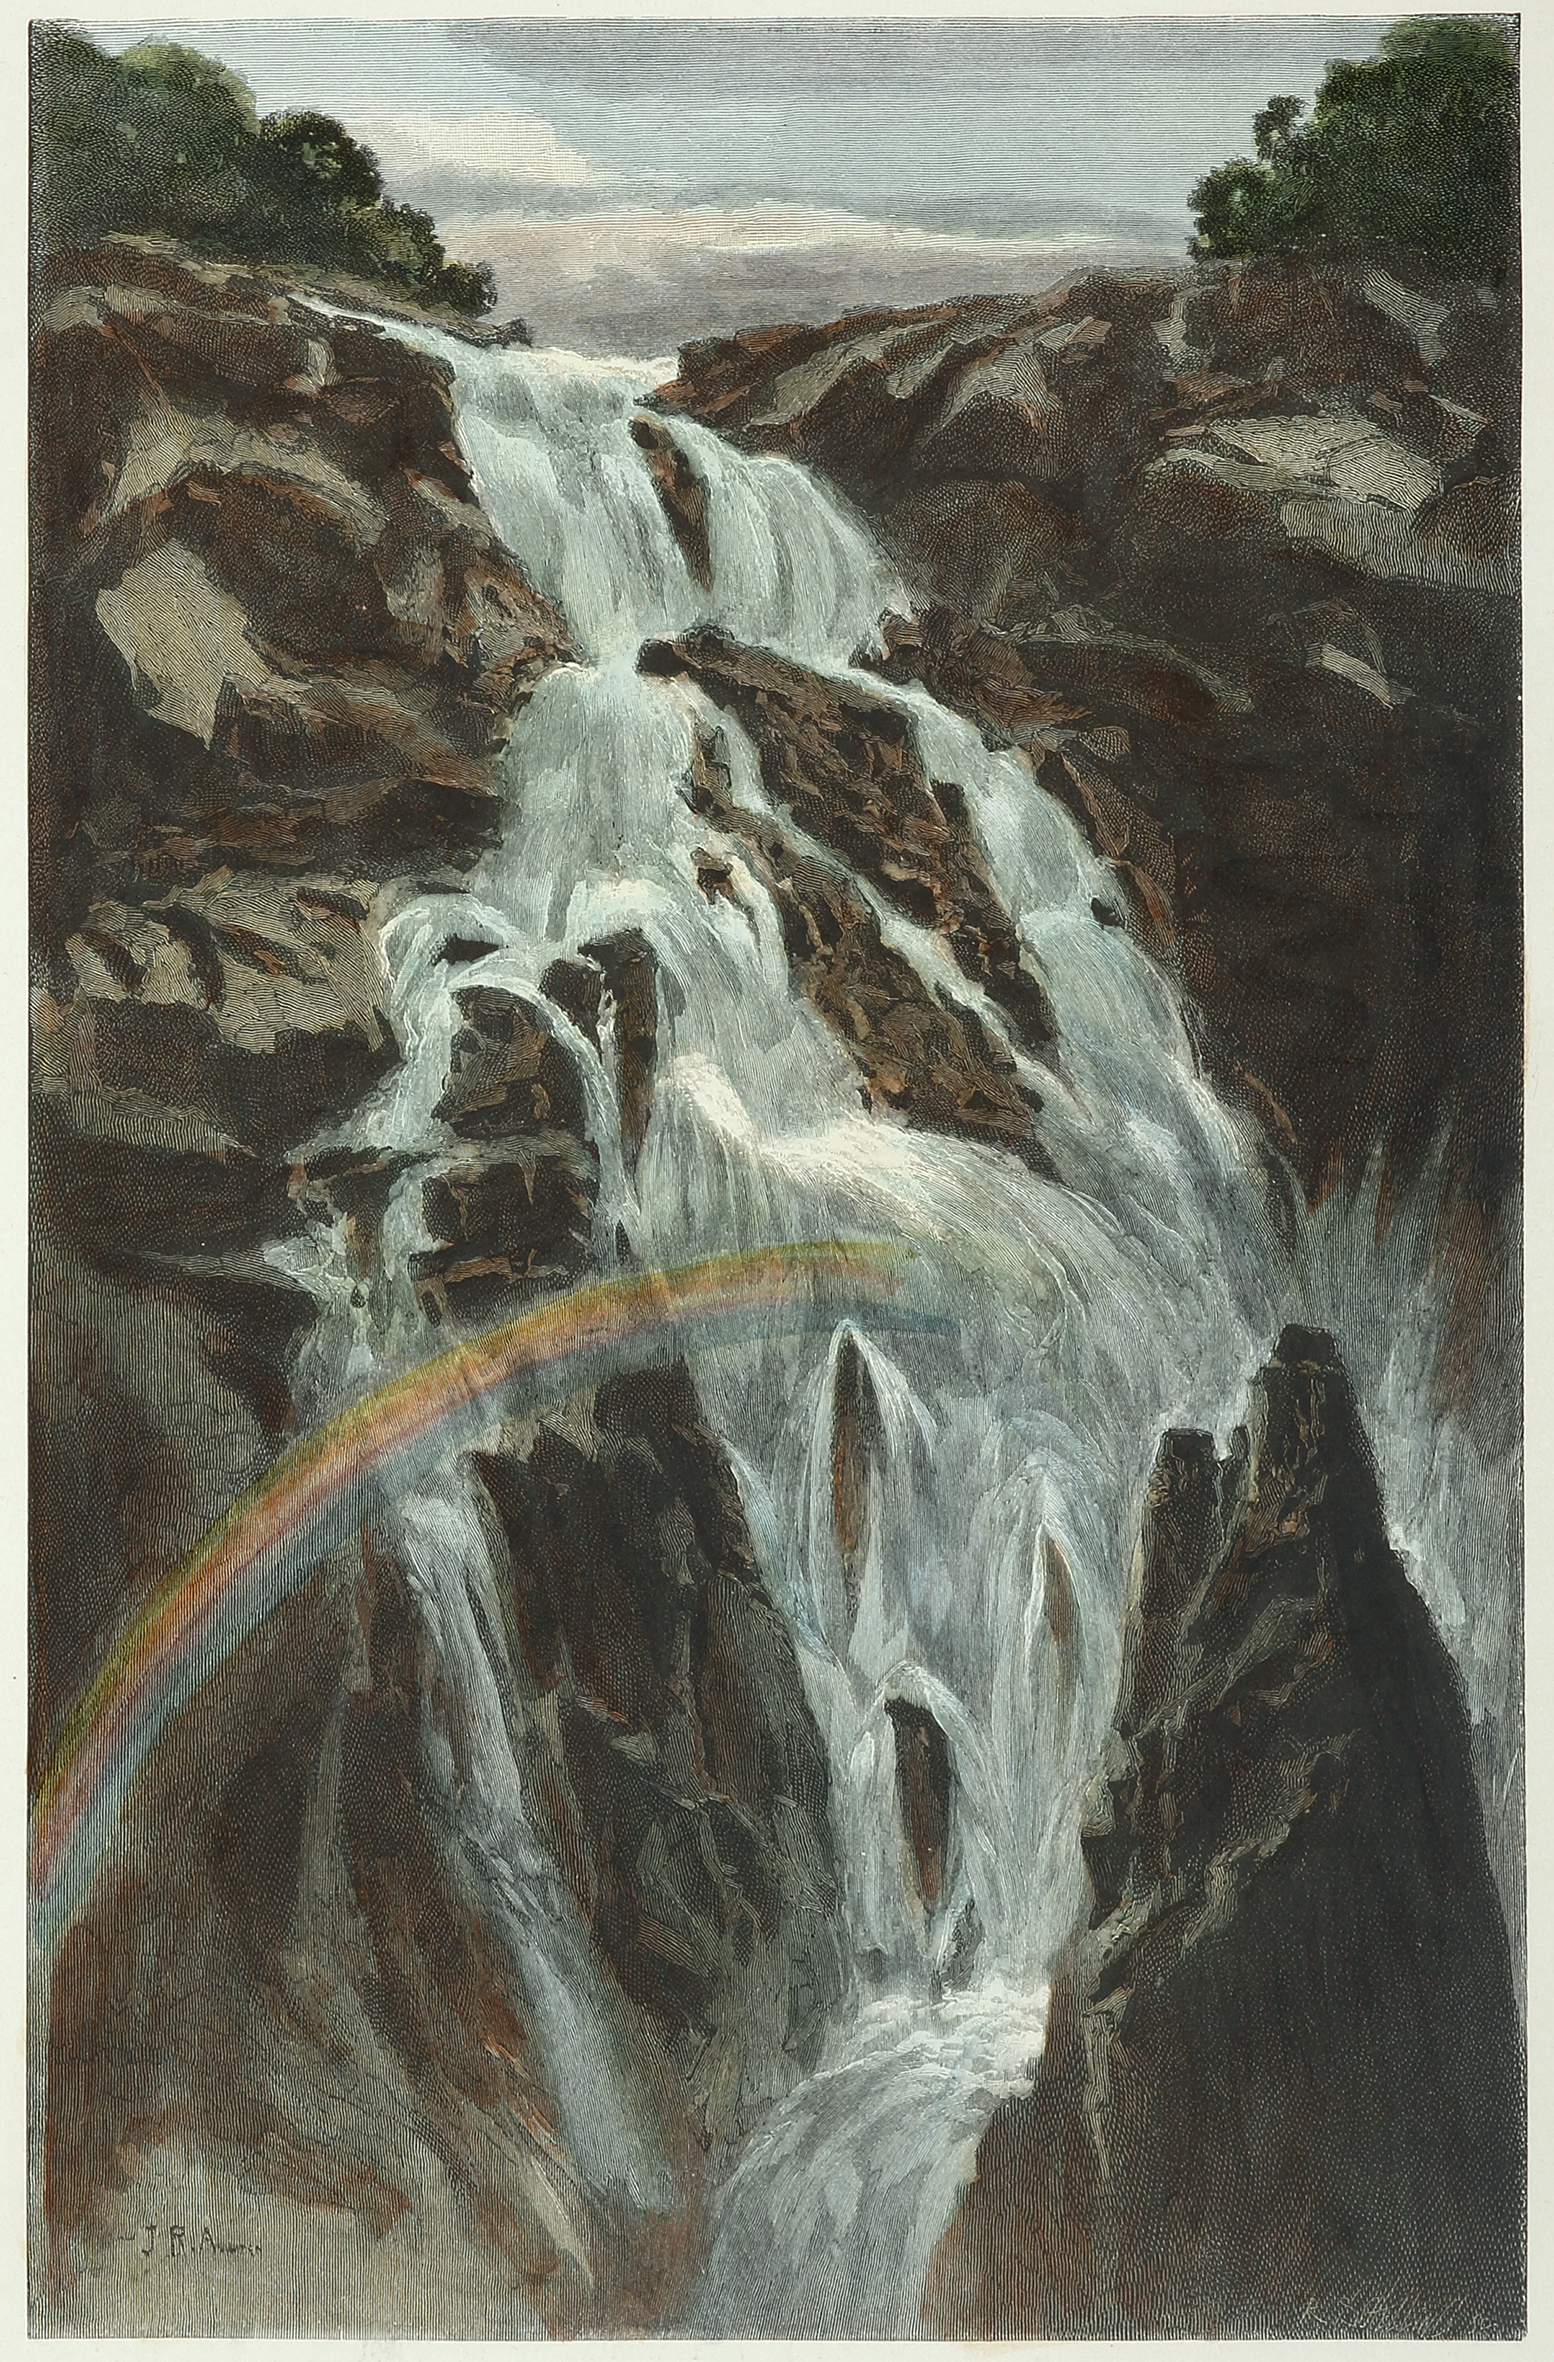 The Barron Falls, near Cairns. - Antique View from 1886